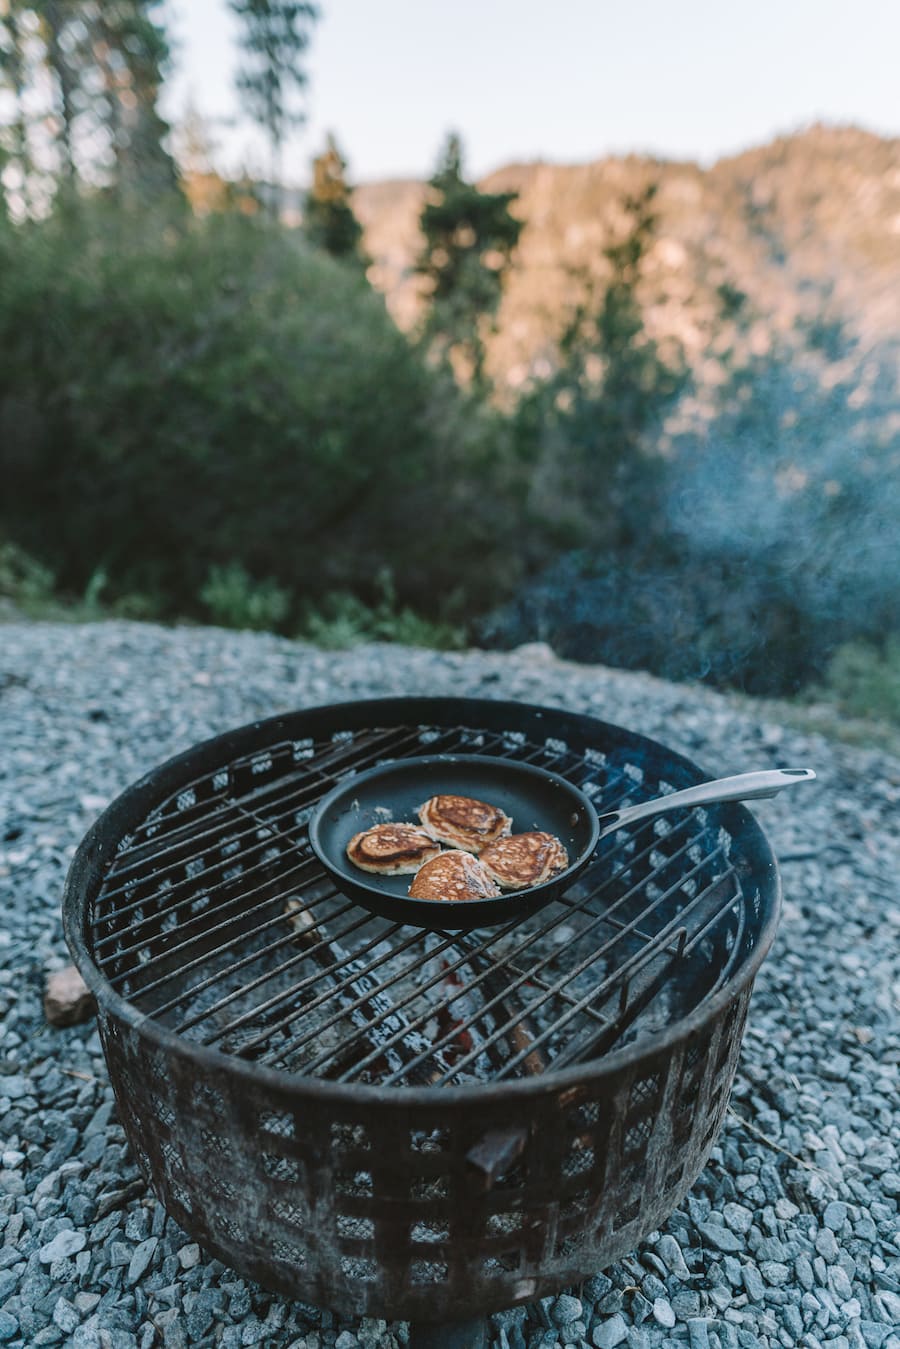 Cooking pancakes over the fire pit at Getaway House